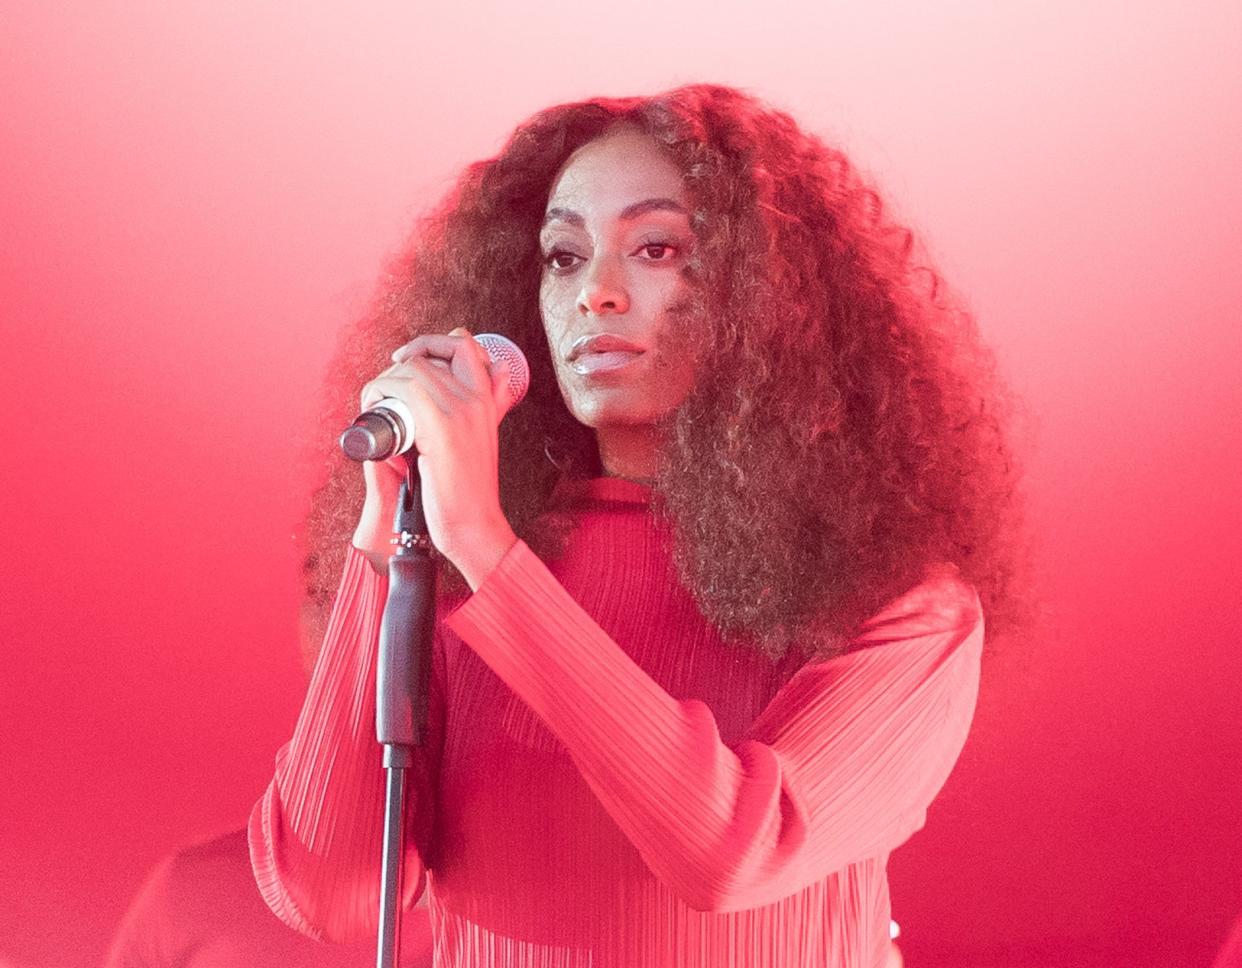 Solange performs at the 2017 Glastonbury Festival in England. (Photo: Samir Hussein via Getty Images)